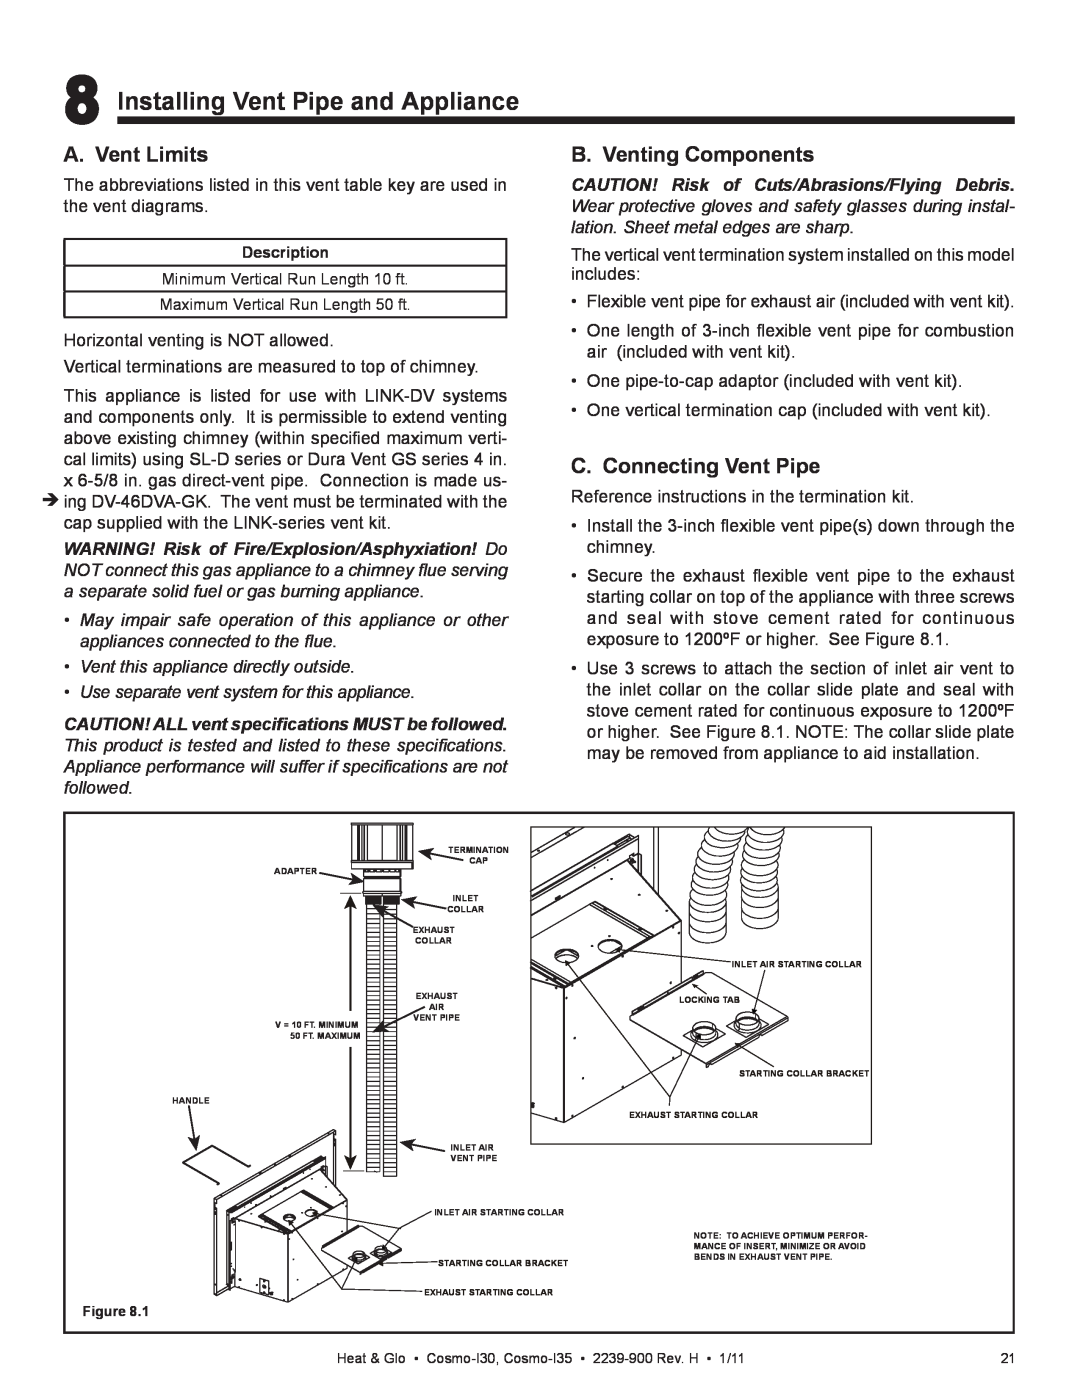 Heat & Glo LifeStyle Cosmo-130 owner manual Installing Vent Pipe and Appliance, A. Vent Limits, B. Venting Components 